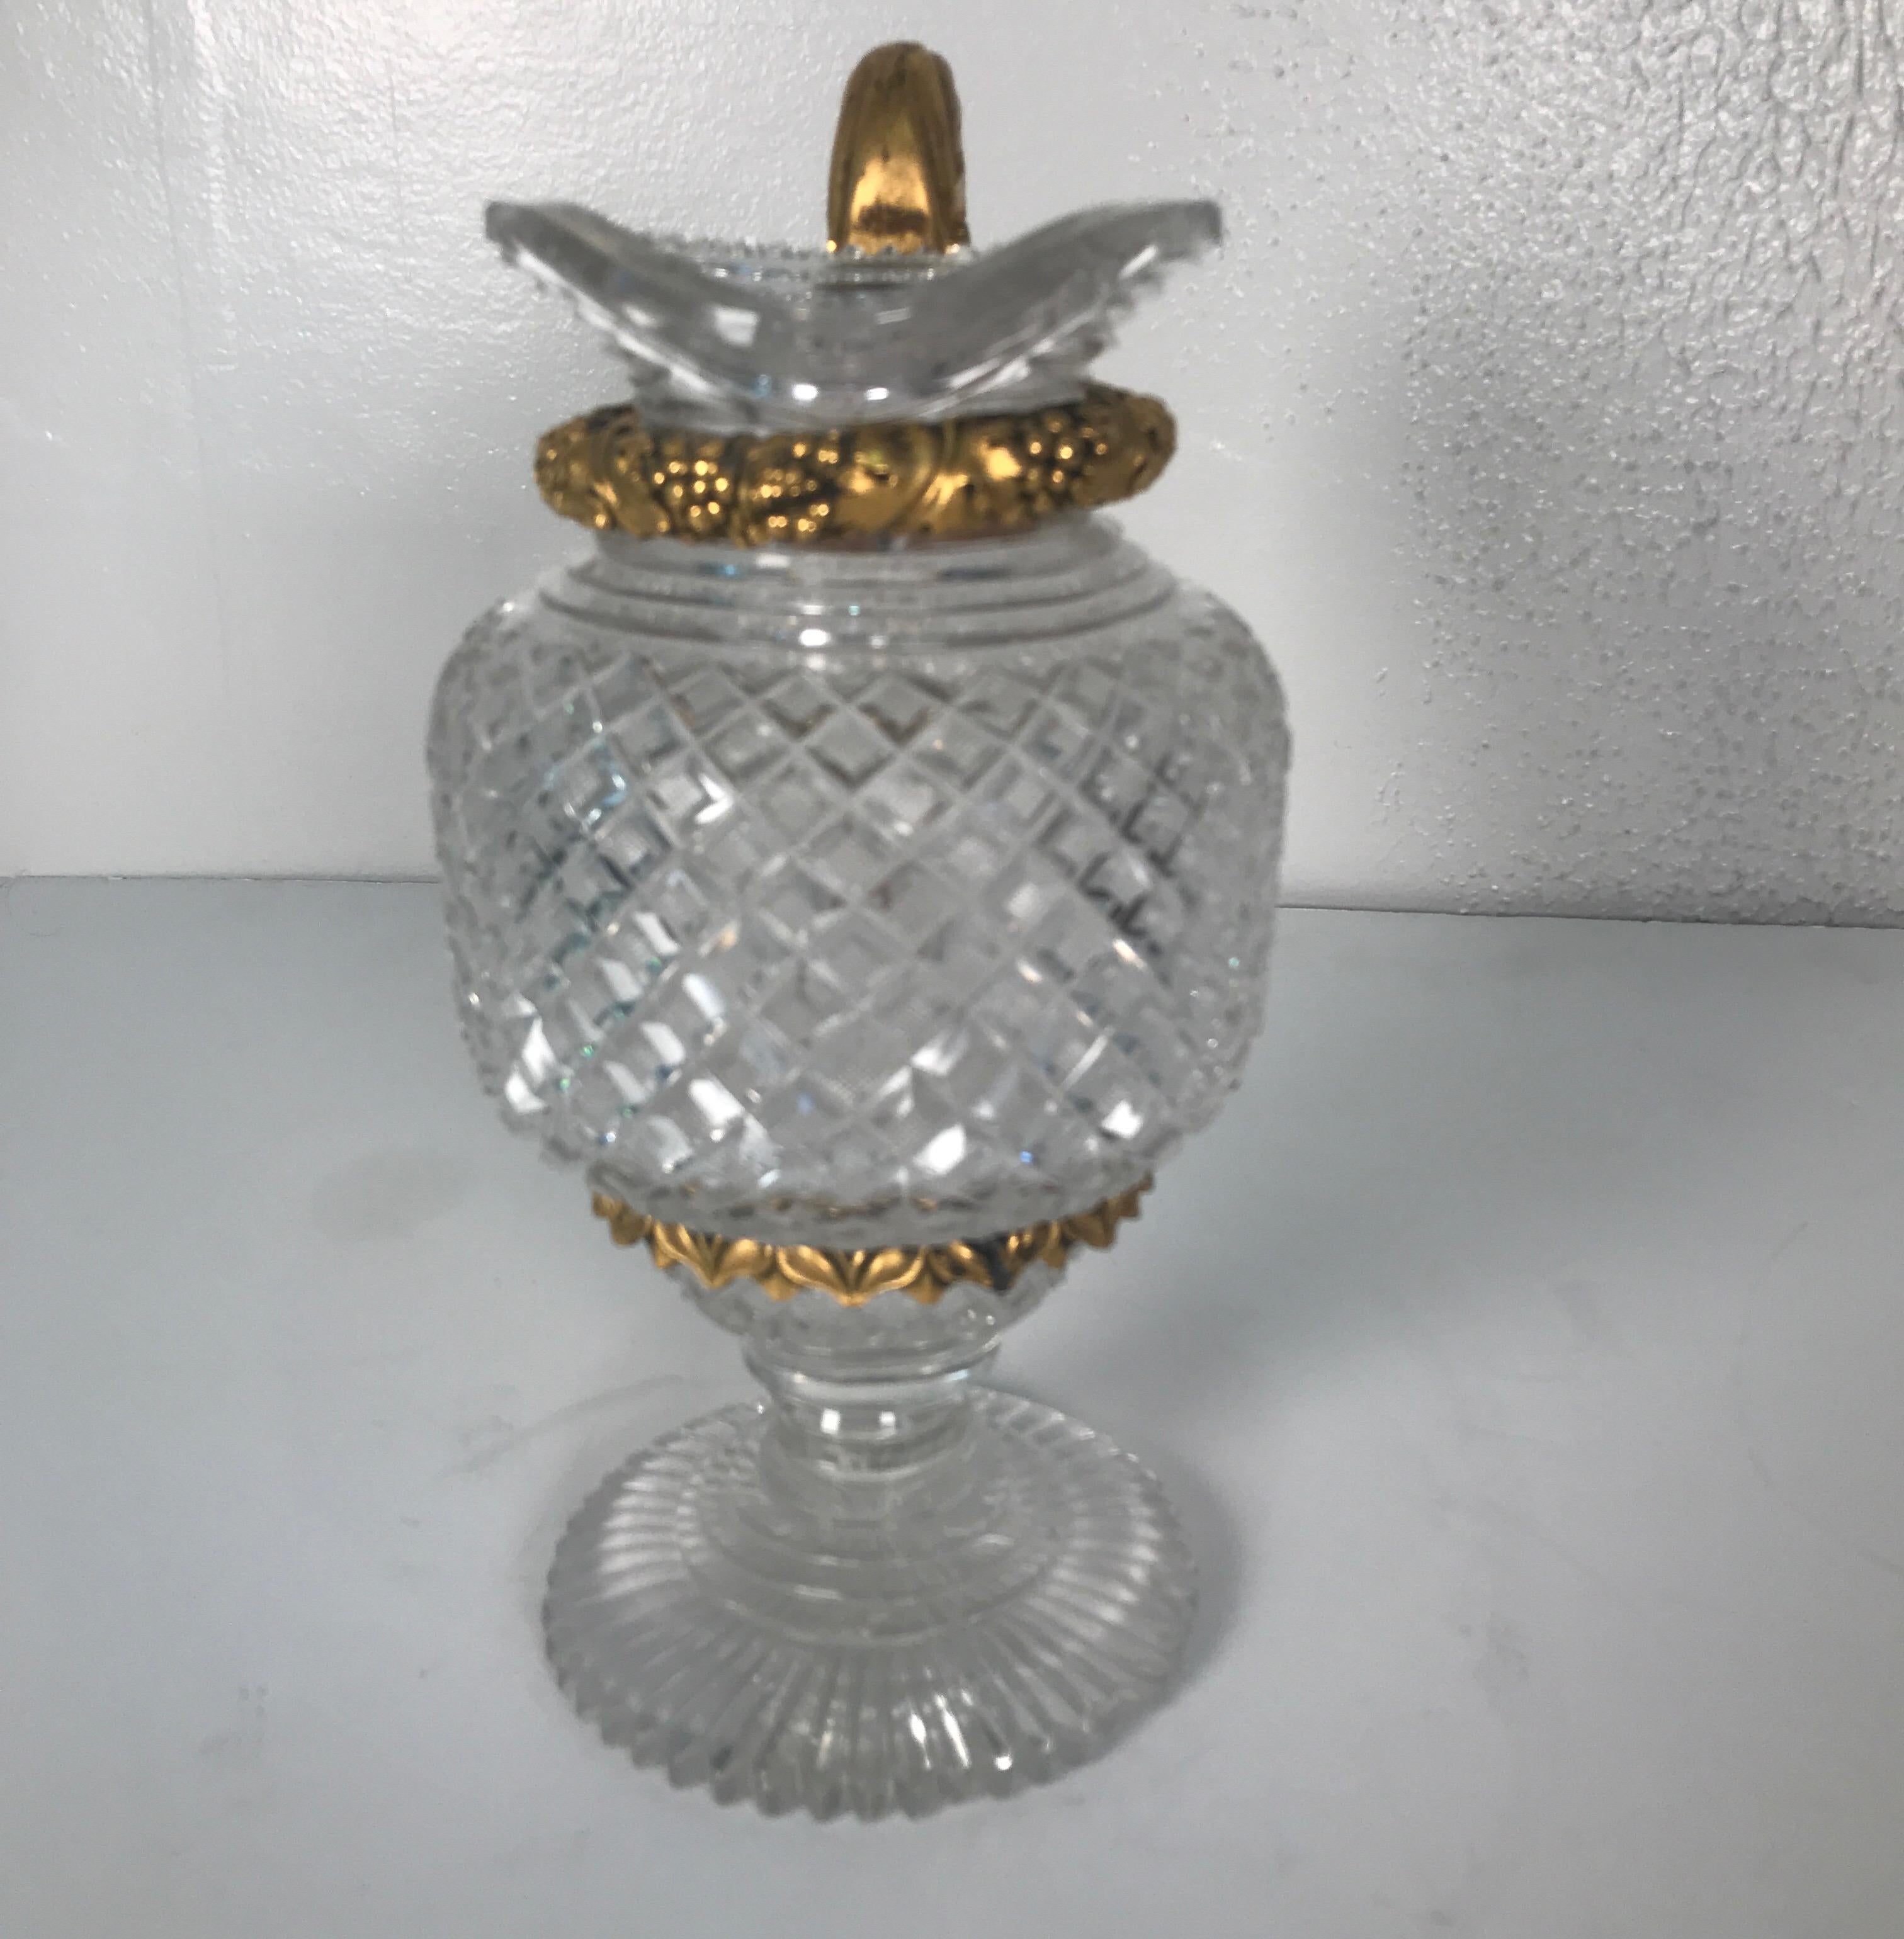 Early French cut glass pitcher attributed to Baccarat with cast gilt bronze ormolu mounts and handle. The all-over diamond cut glass body with beautifully cast bronze ring mounts and handles. The round base with a starburst pattern. There is a